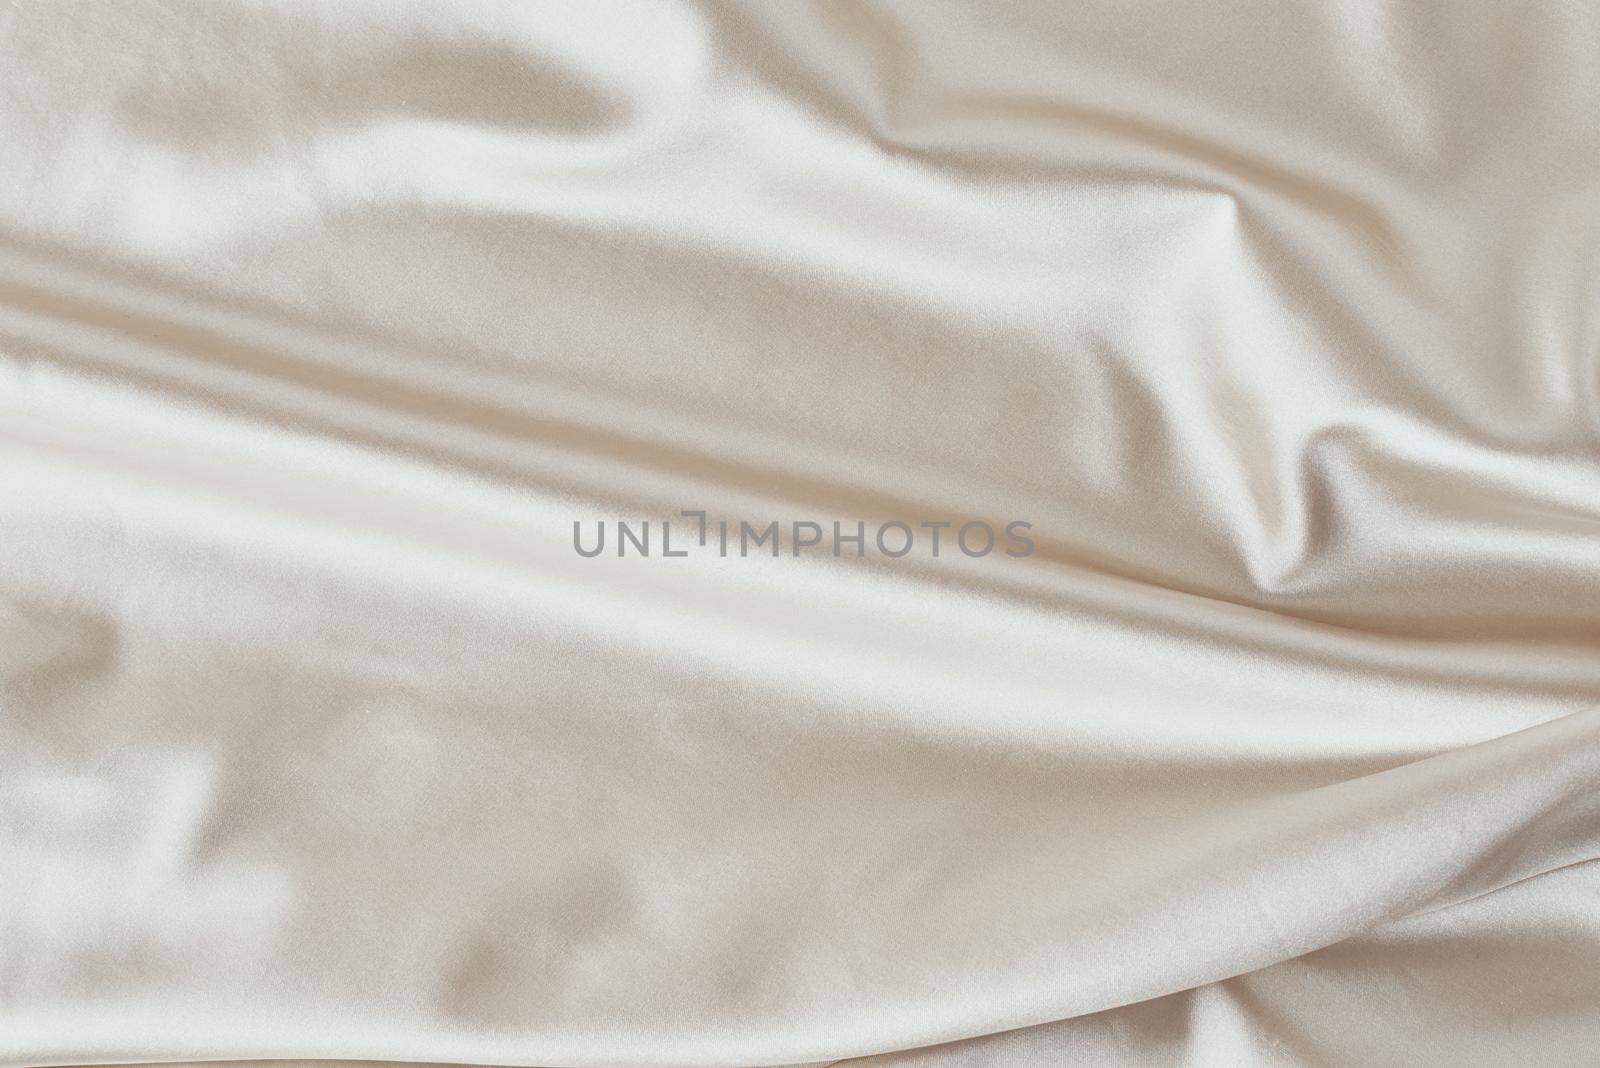 Golden light silk background with a folds. Abstract texture of rippled satin surface by Lazy_Bear